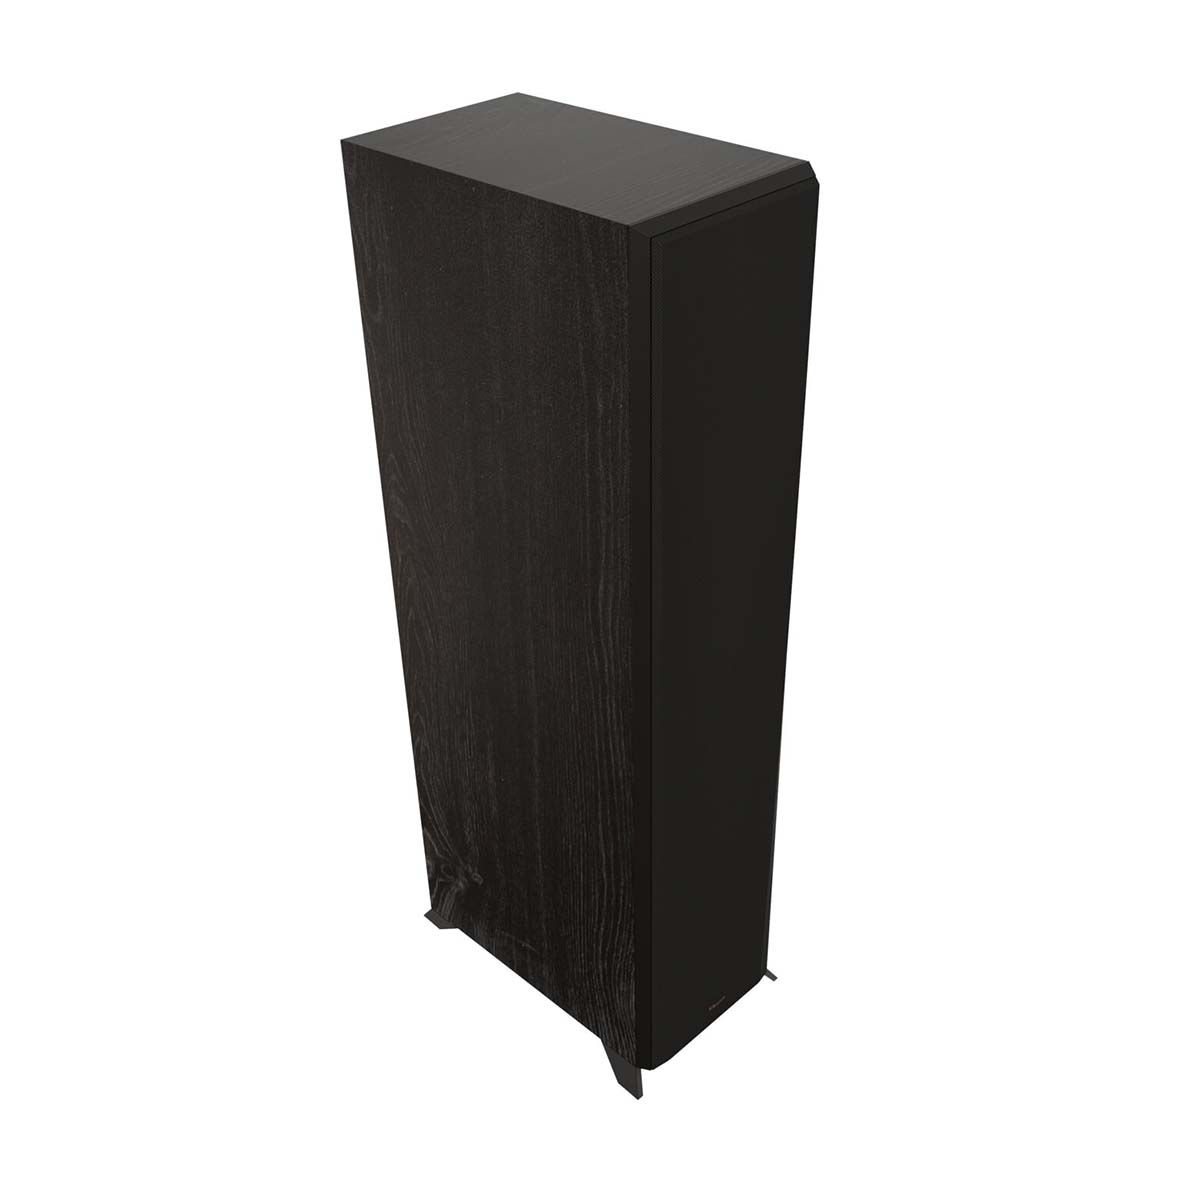 Klipsch RP-8000F II Floorstanding Speaker - Ebony - angled front view with grill